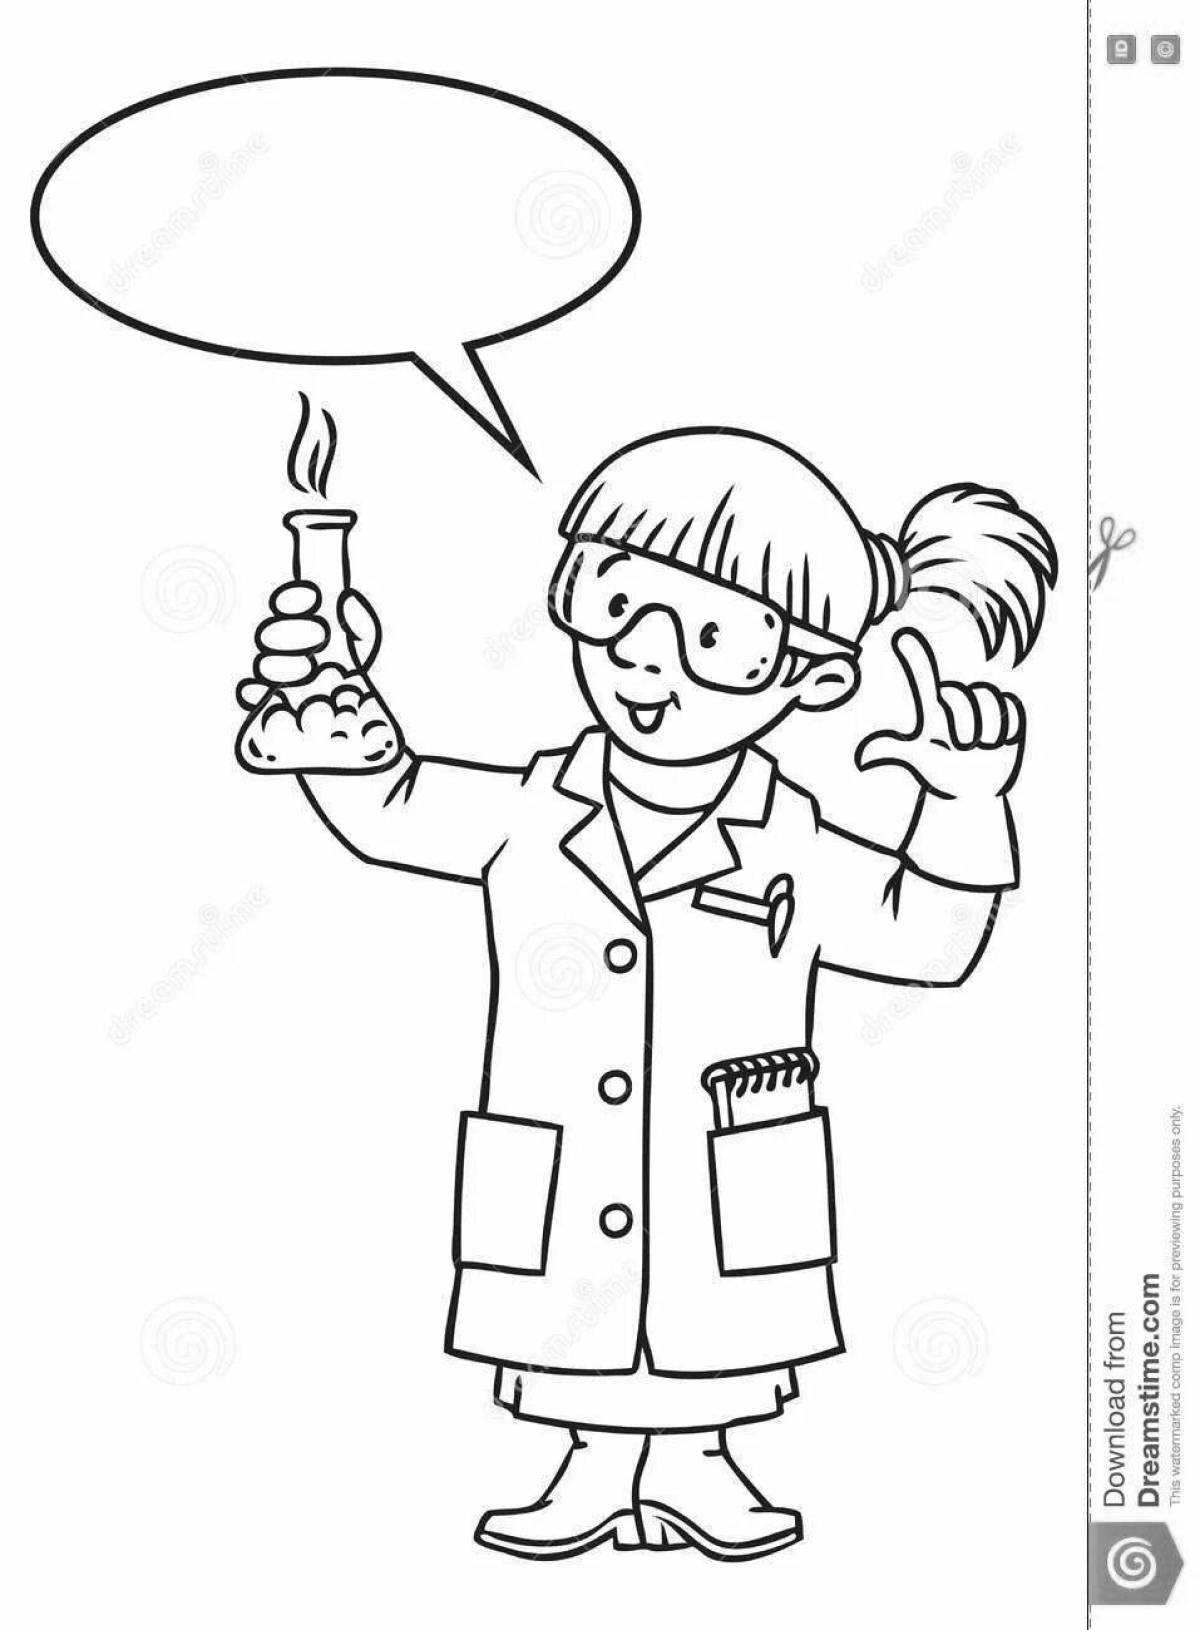 Engaging scientists coloring pages for kids